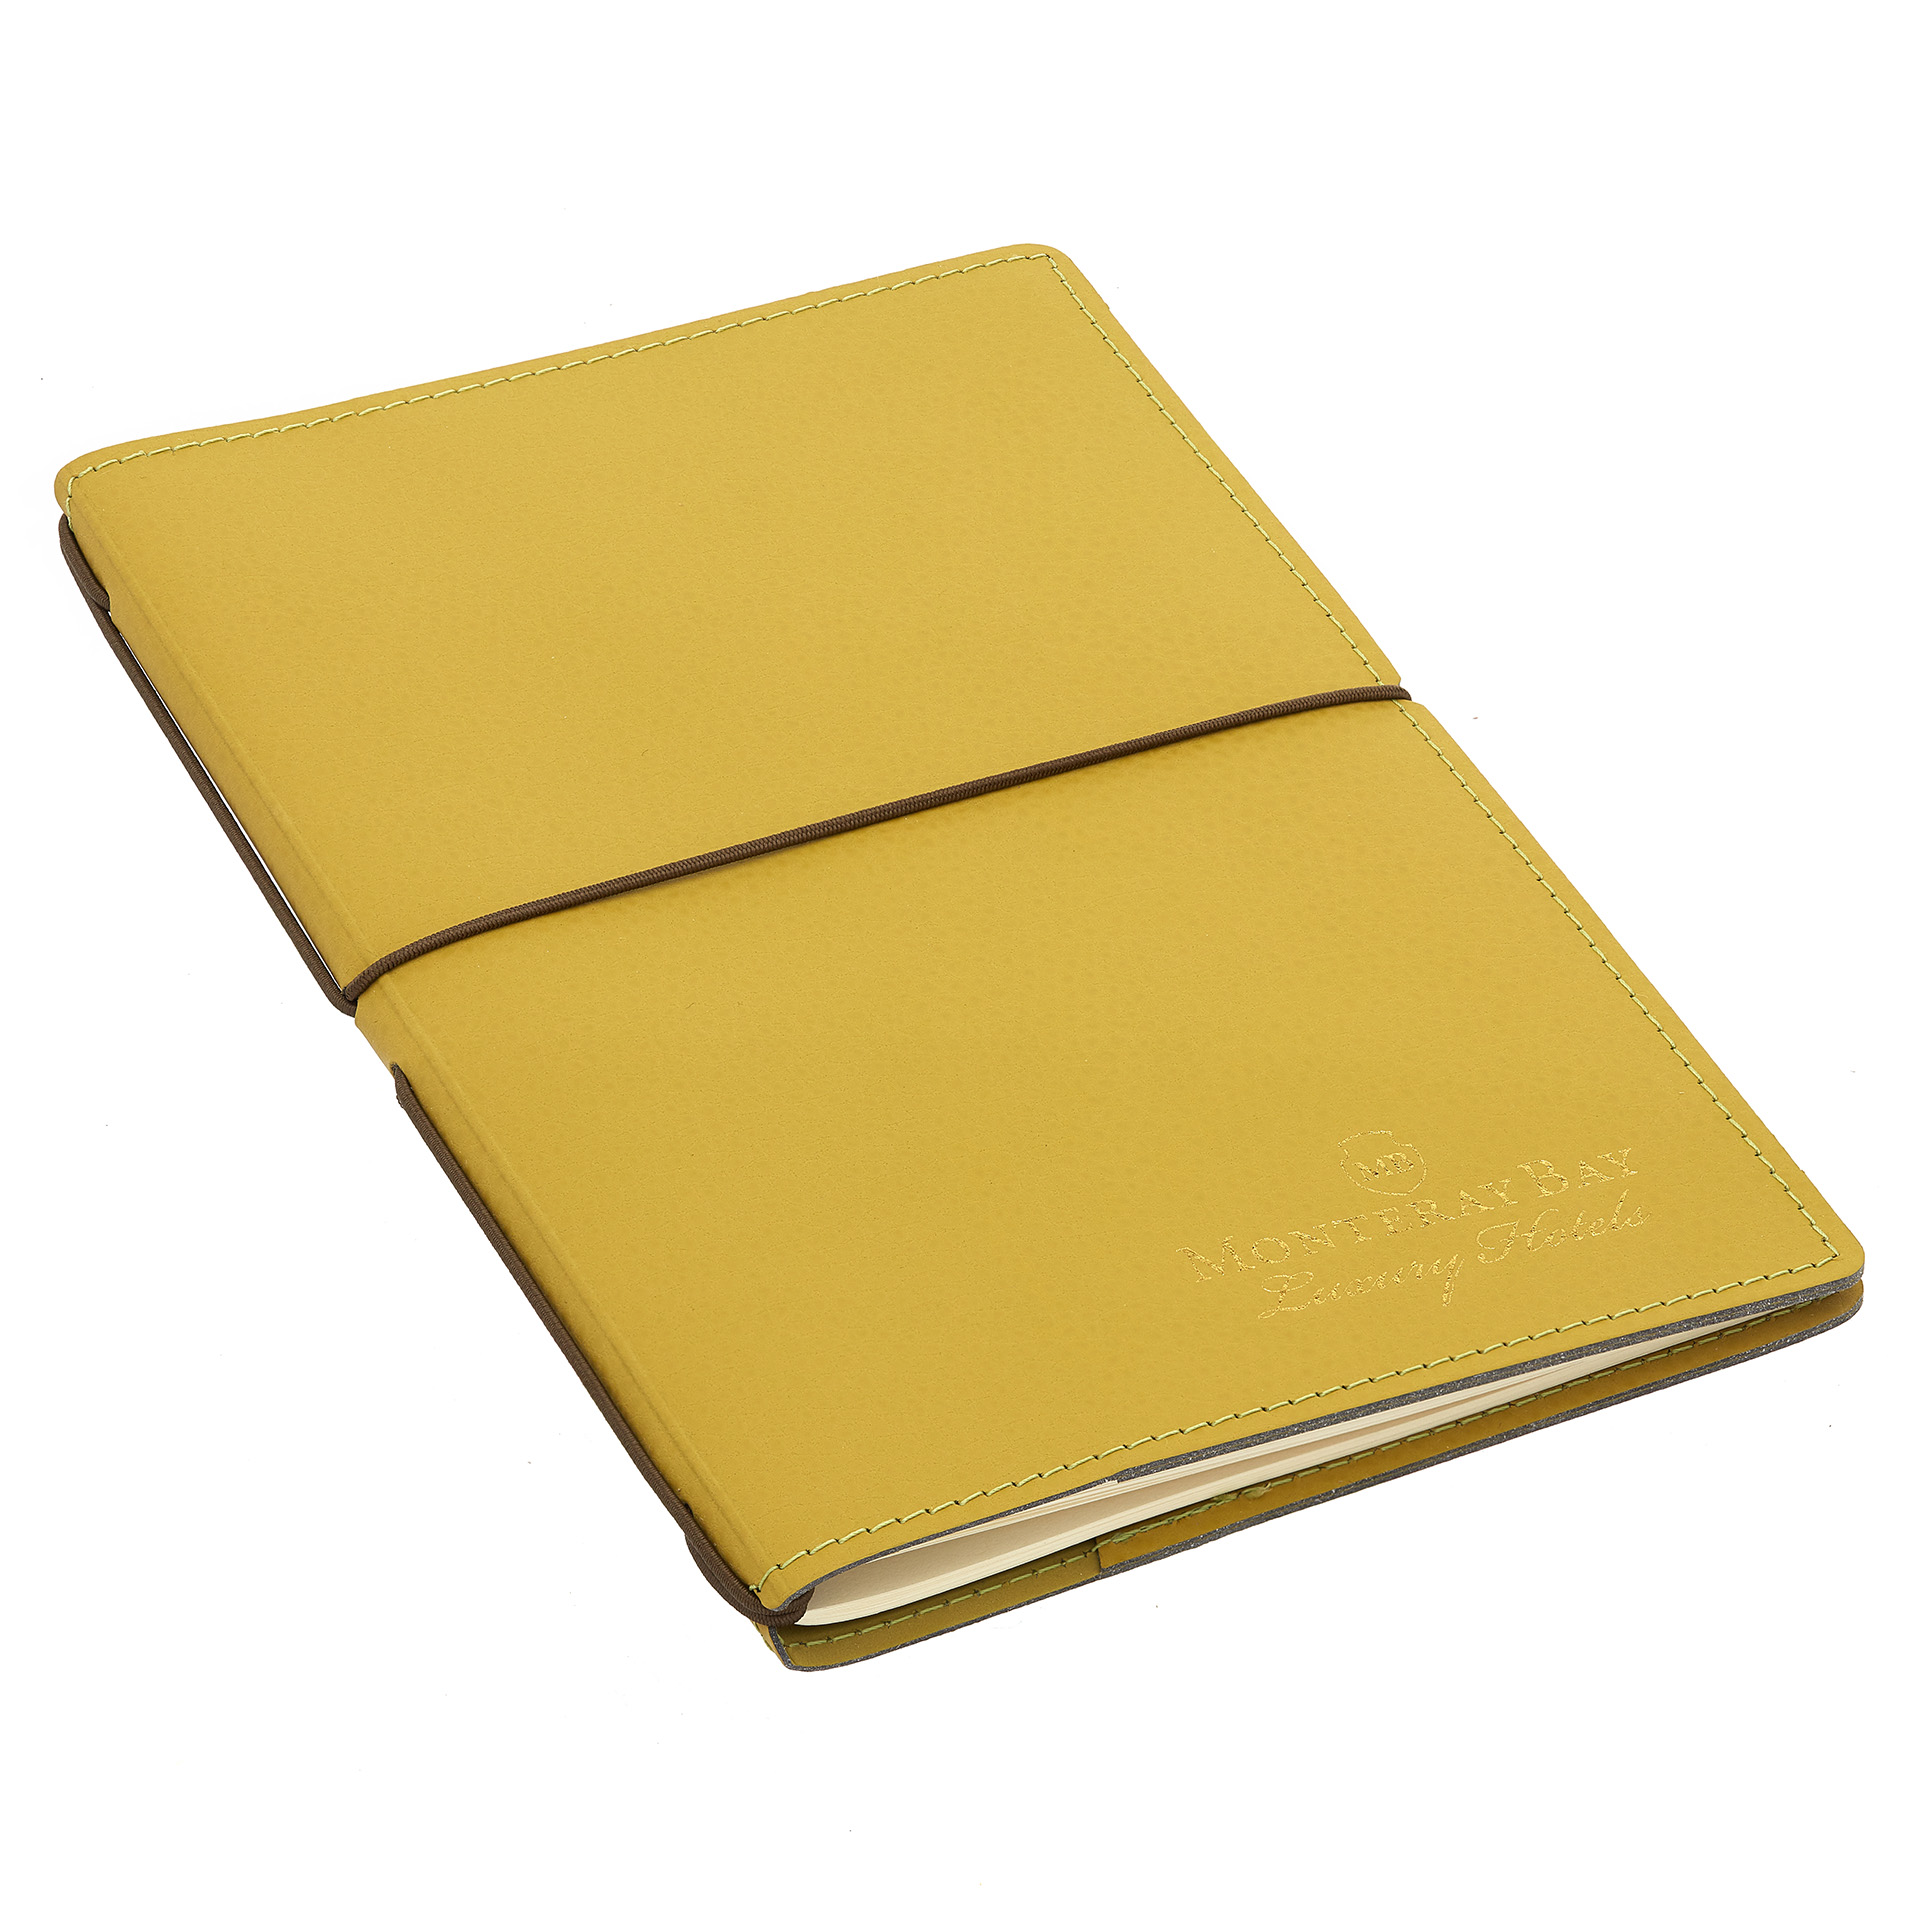 Stylish refillable journal with covers made from recycled leather fibres which are Oekotex certified. Made in the EU, this notebook is beautifully crafted and has a "textured leather" cover. Comes with a refillable insert (64 pages) of ivory sustainable paper. LINED, PLAIN or DOTTED options are available. Available in 4 modern colours.